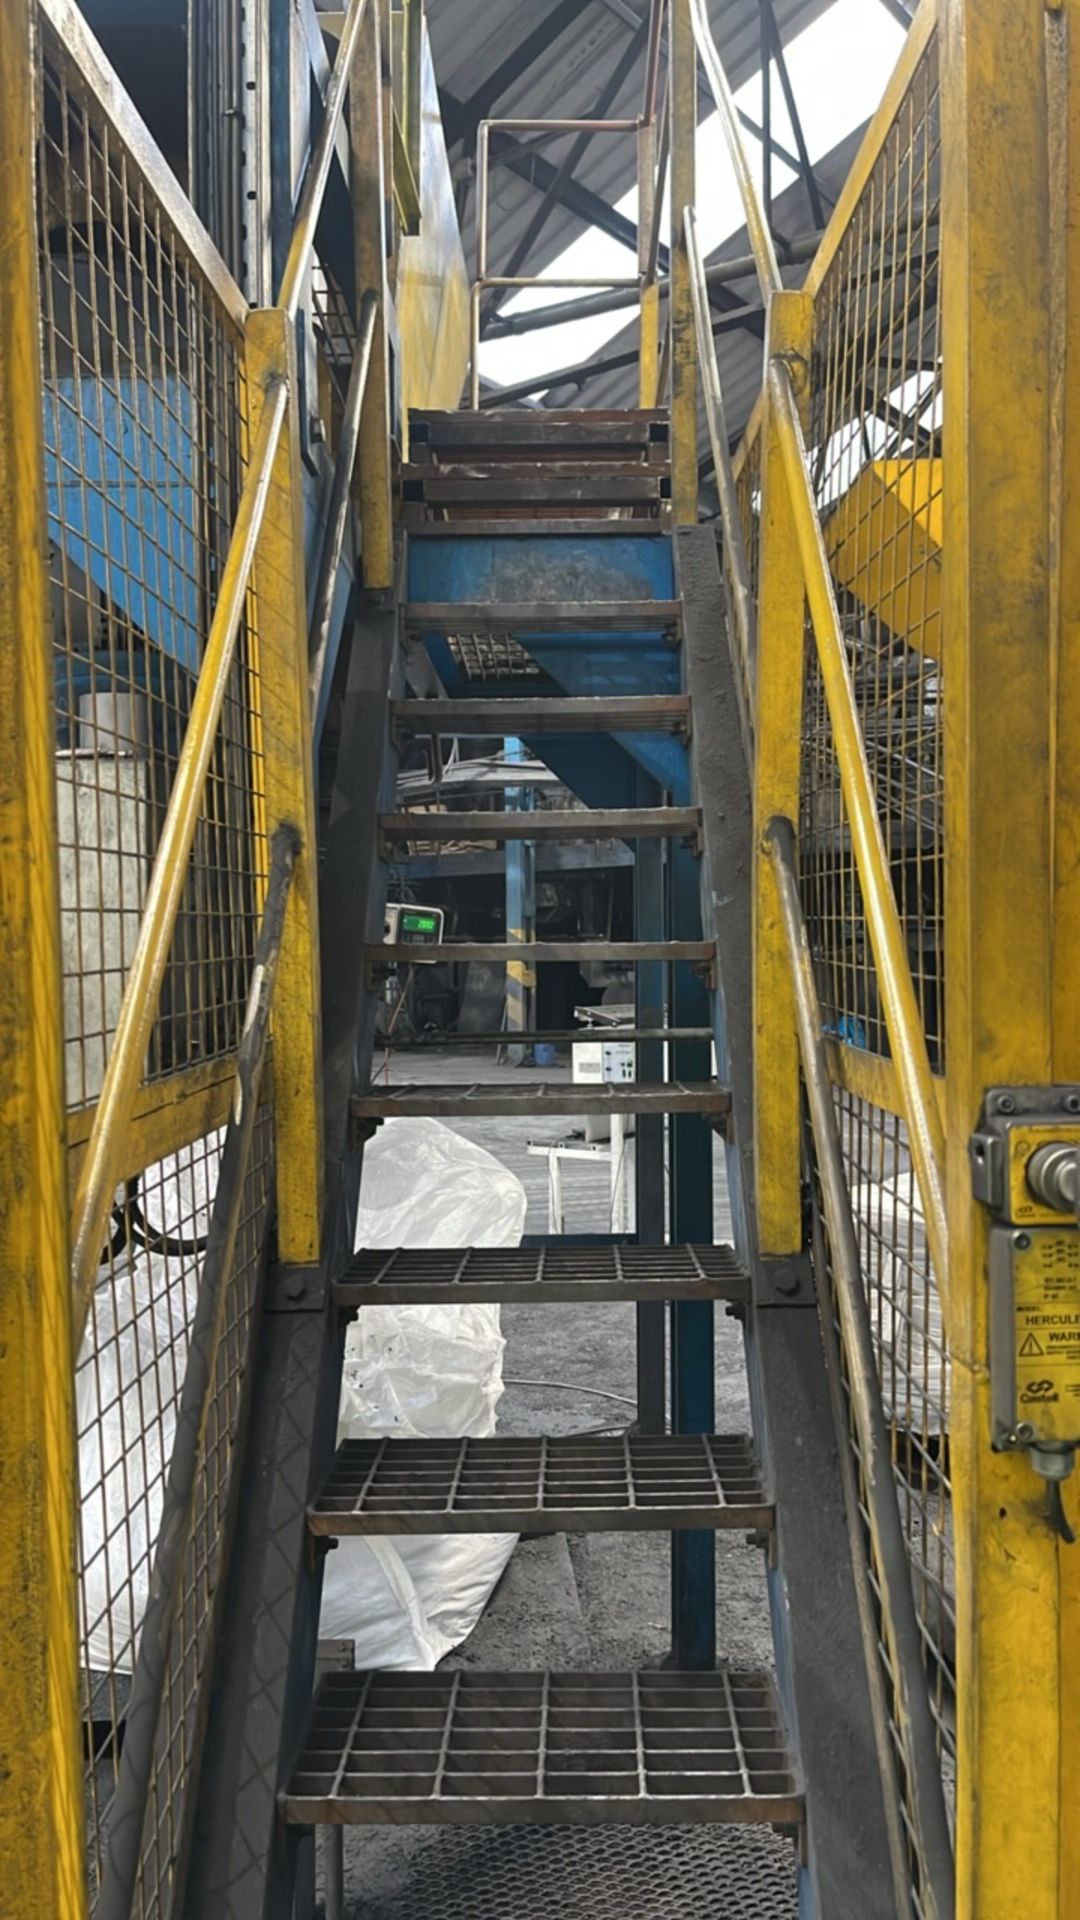 Hopper Unit With Staircase - Image 9 of 15